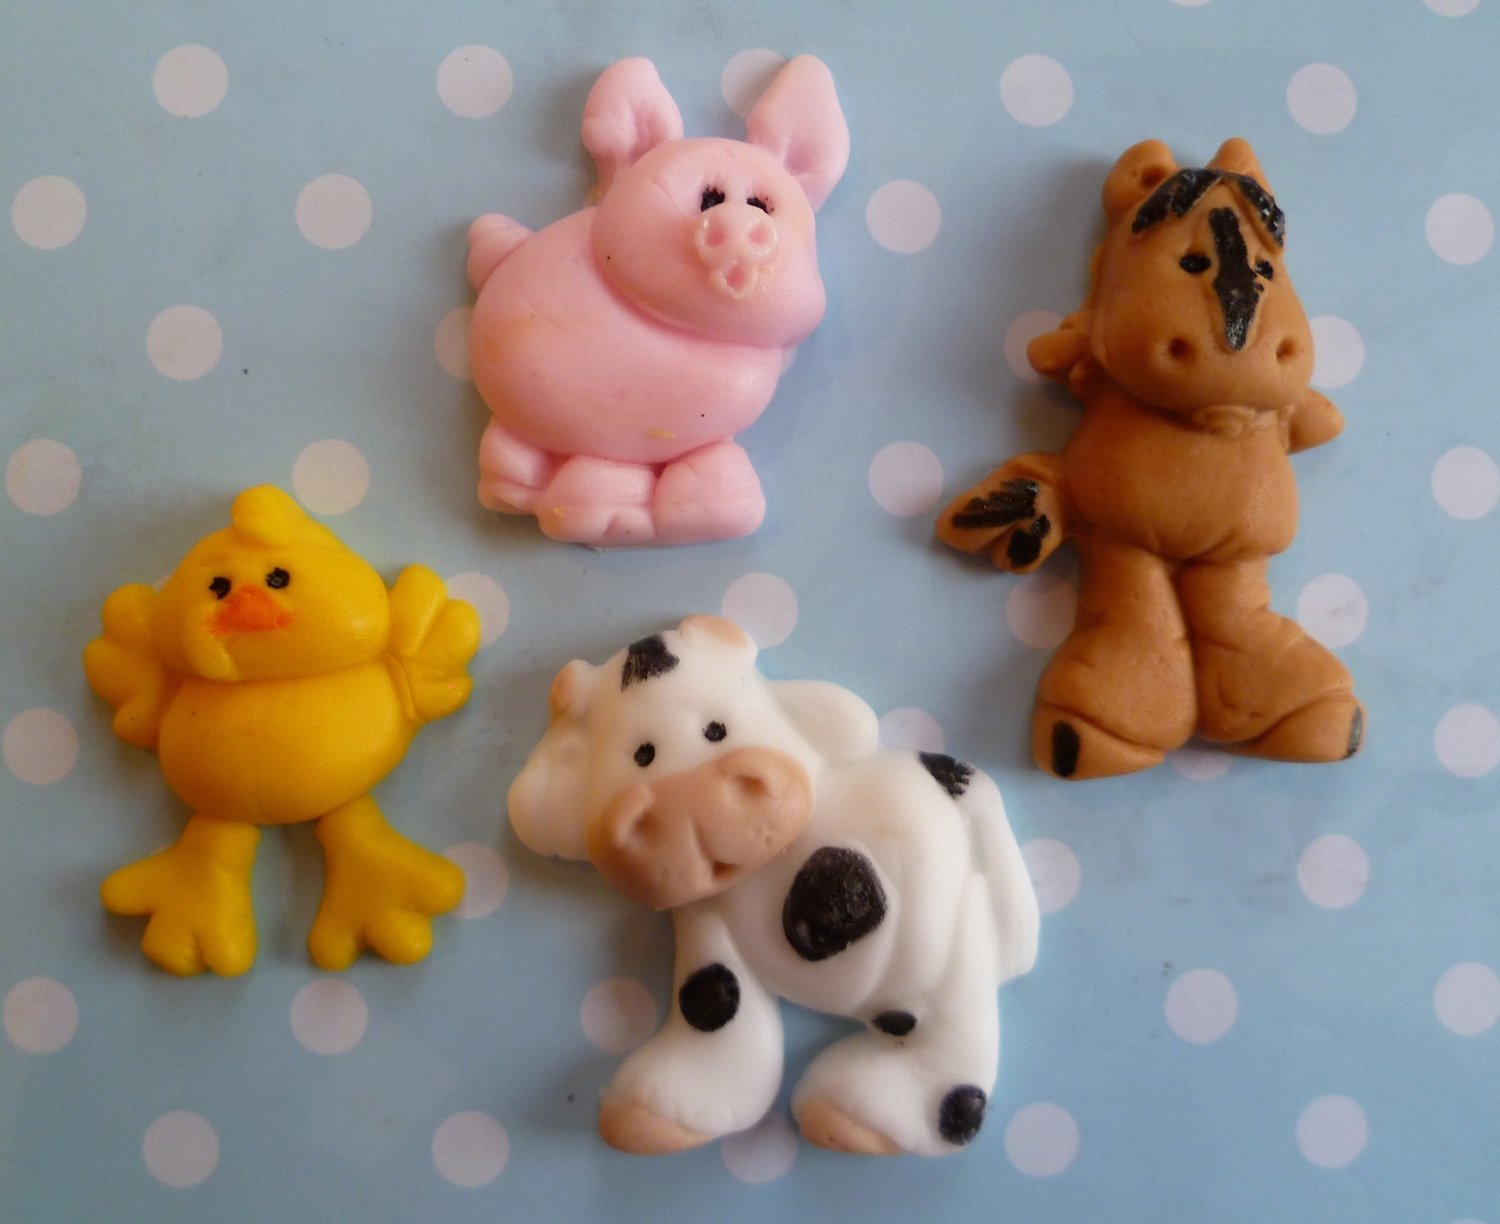 8 FARM ANIMALS EDIBLE CAKE TOPPERS